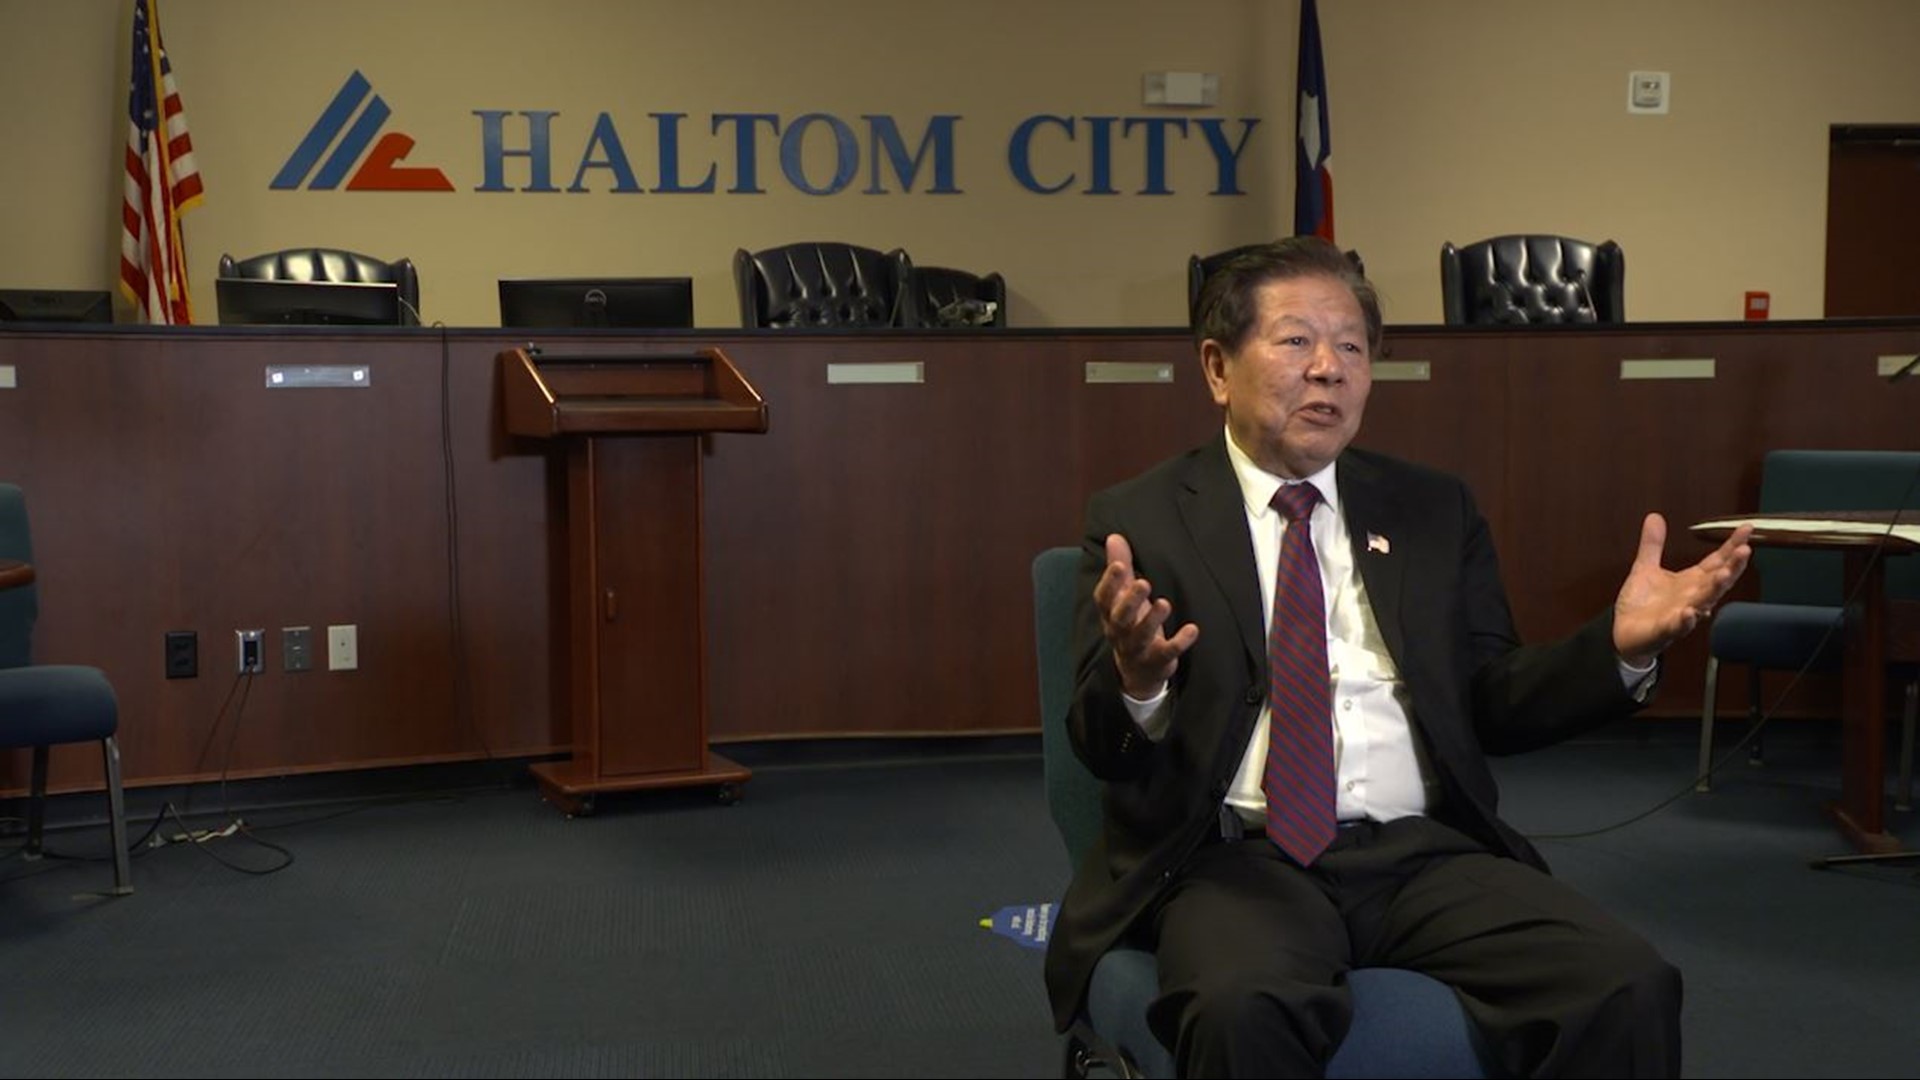 "Everybody has the right to live. Do not be thinking I want to destroy you because you don't look like me," said Haltom City Mayor An Truong.